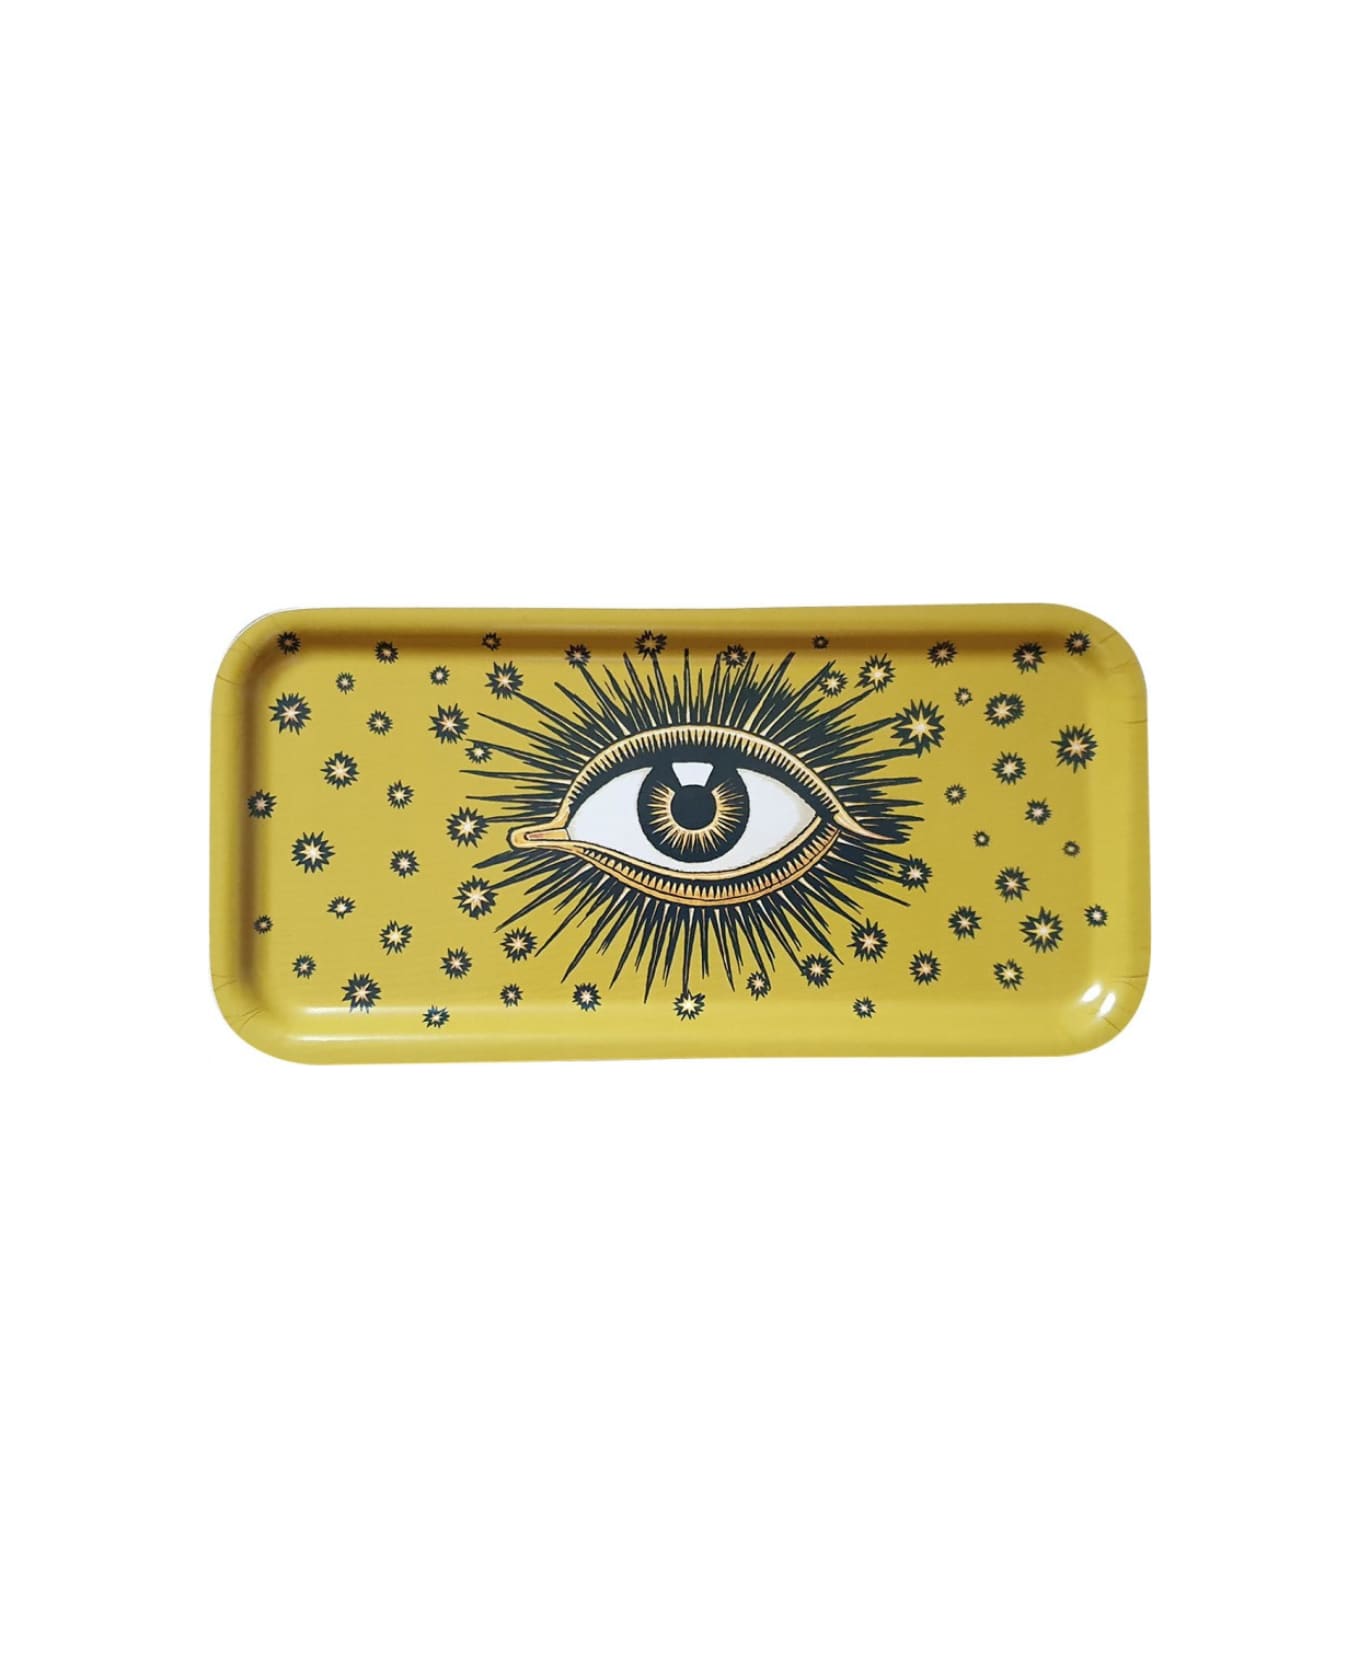 Les-Ottomans Eyes Yellow Wood Tray Les-ottomans Home - Yellow